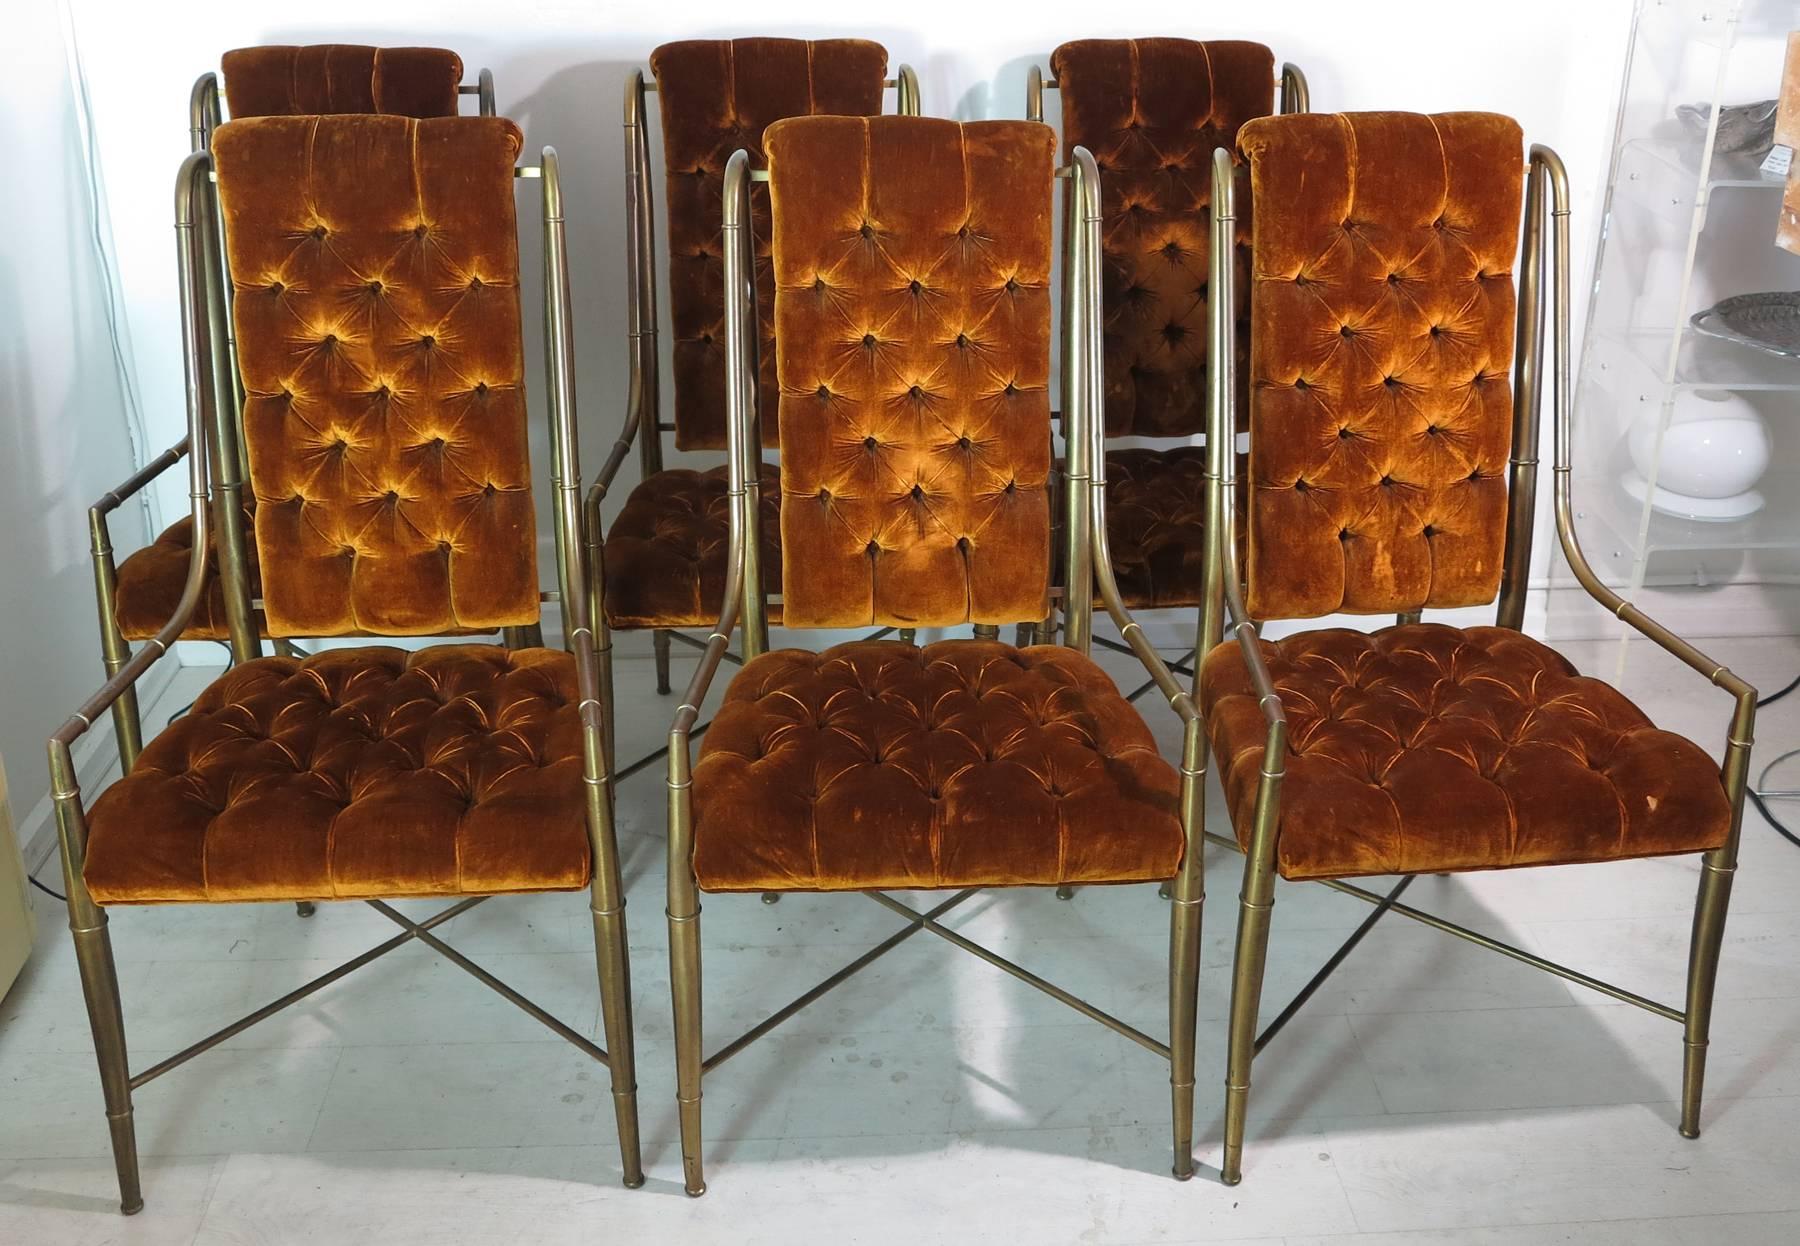 20th Century Vintage Mastercraft Six Brass Faux Bamboo Imperial Dining Chairs